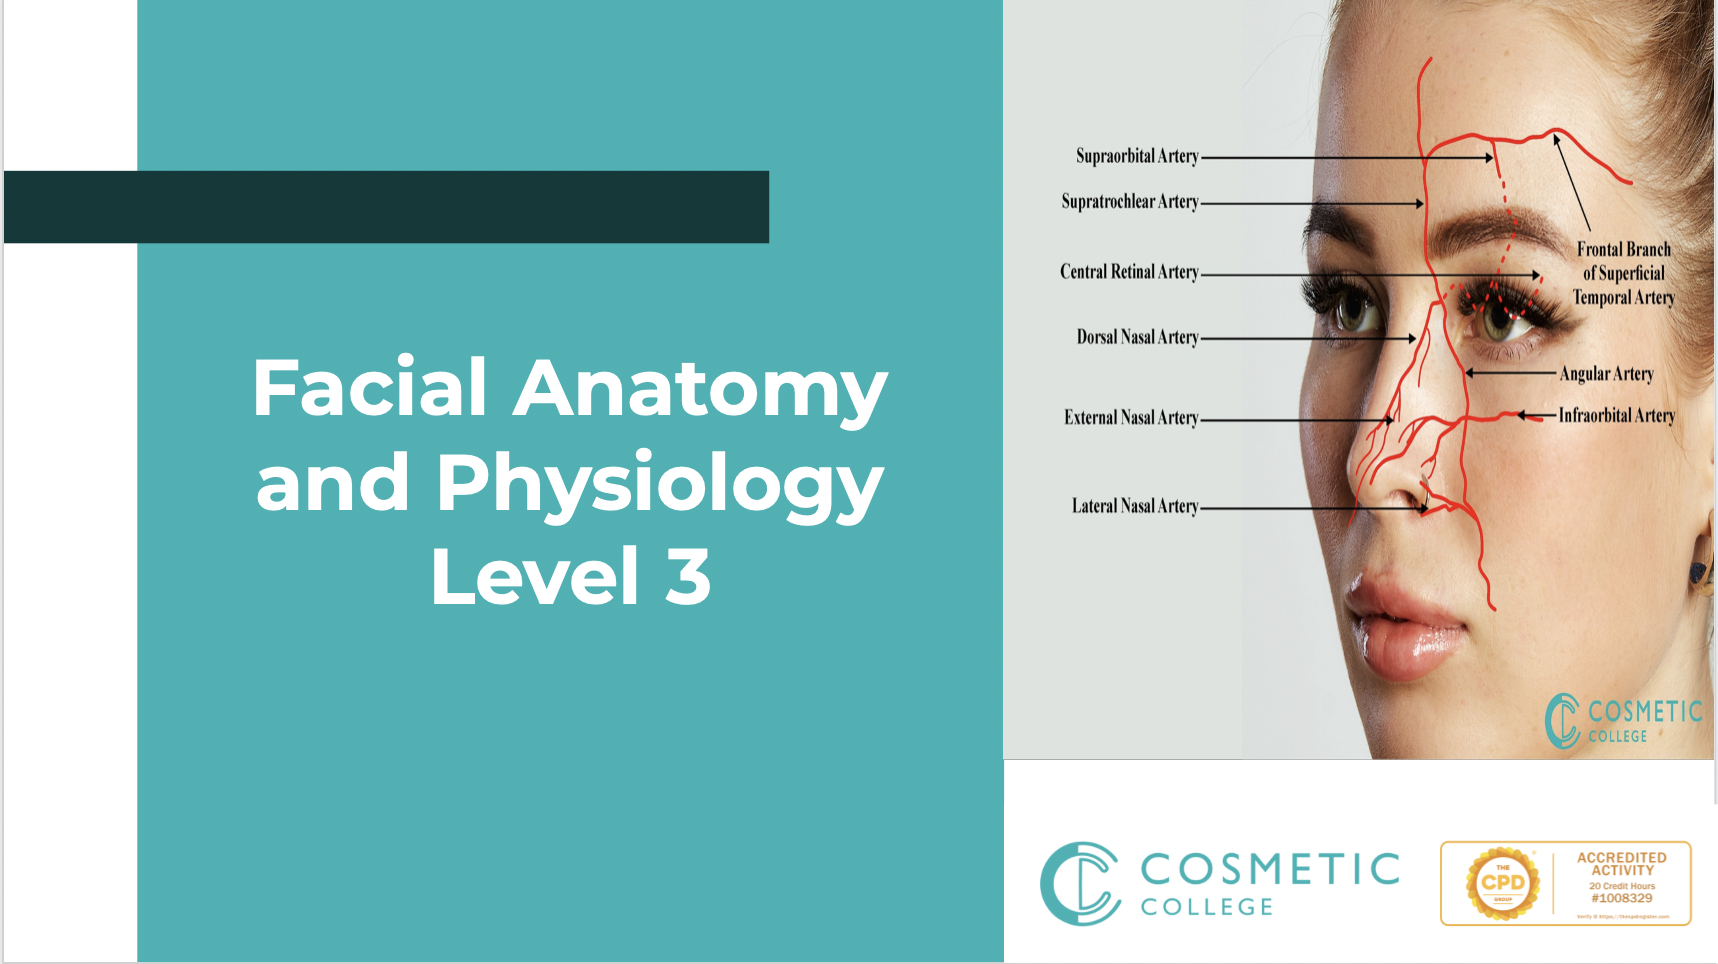 Facial Anatomy and Physiology